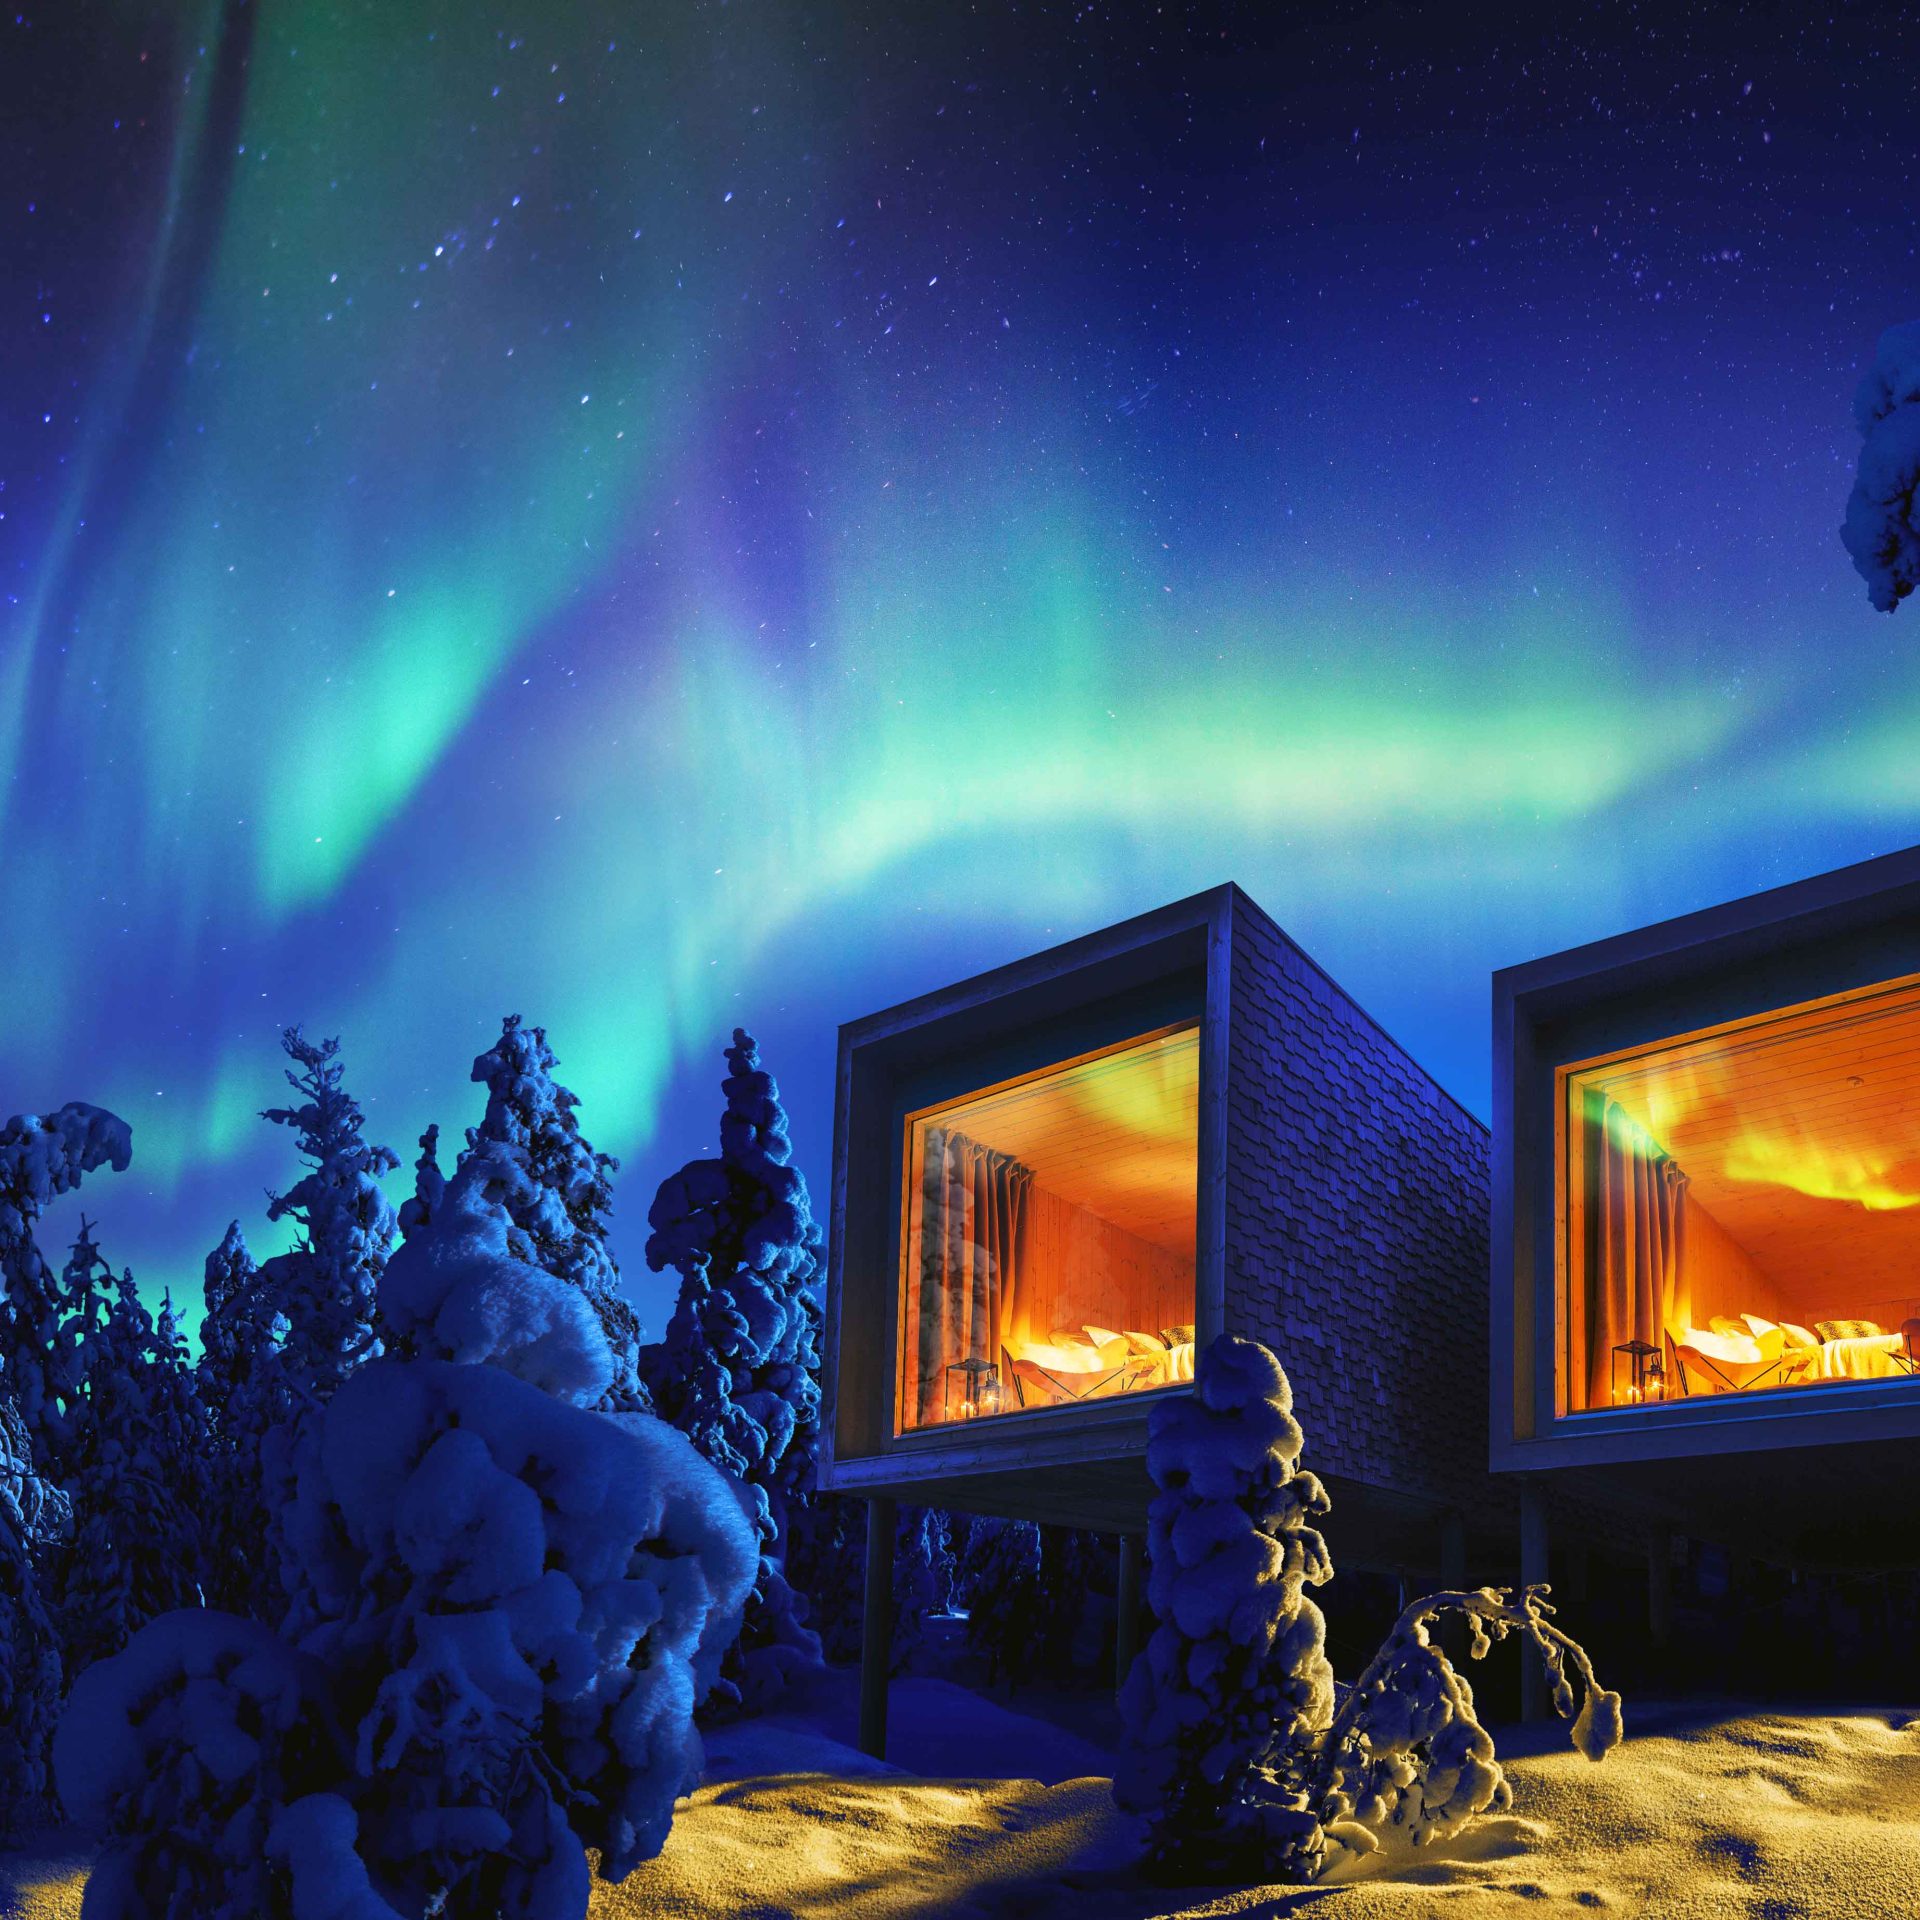 Arctic TreeHouse Hotel is located at the Arctic Circle.